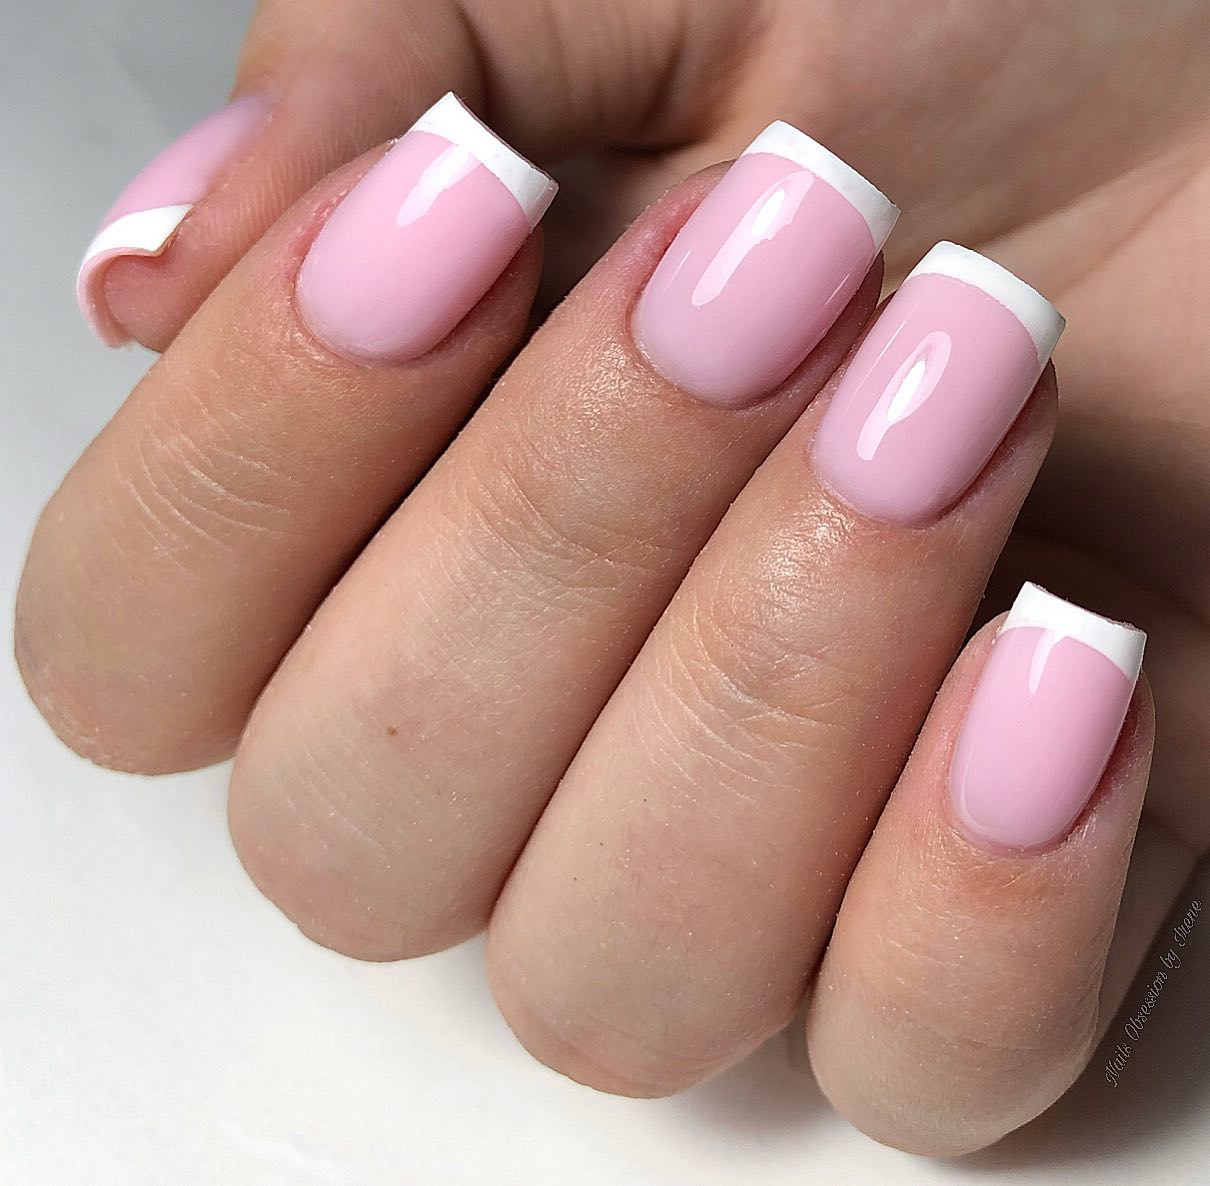 Traditional French nails will never go out of fashion. The best part about these? You can do them on your own!